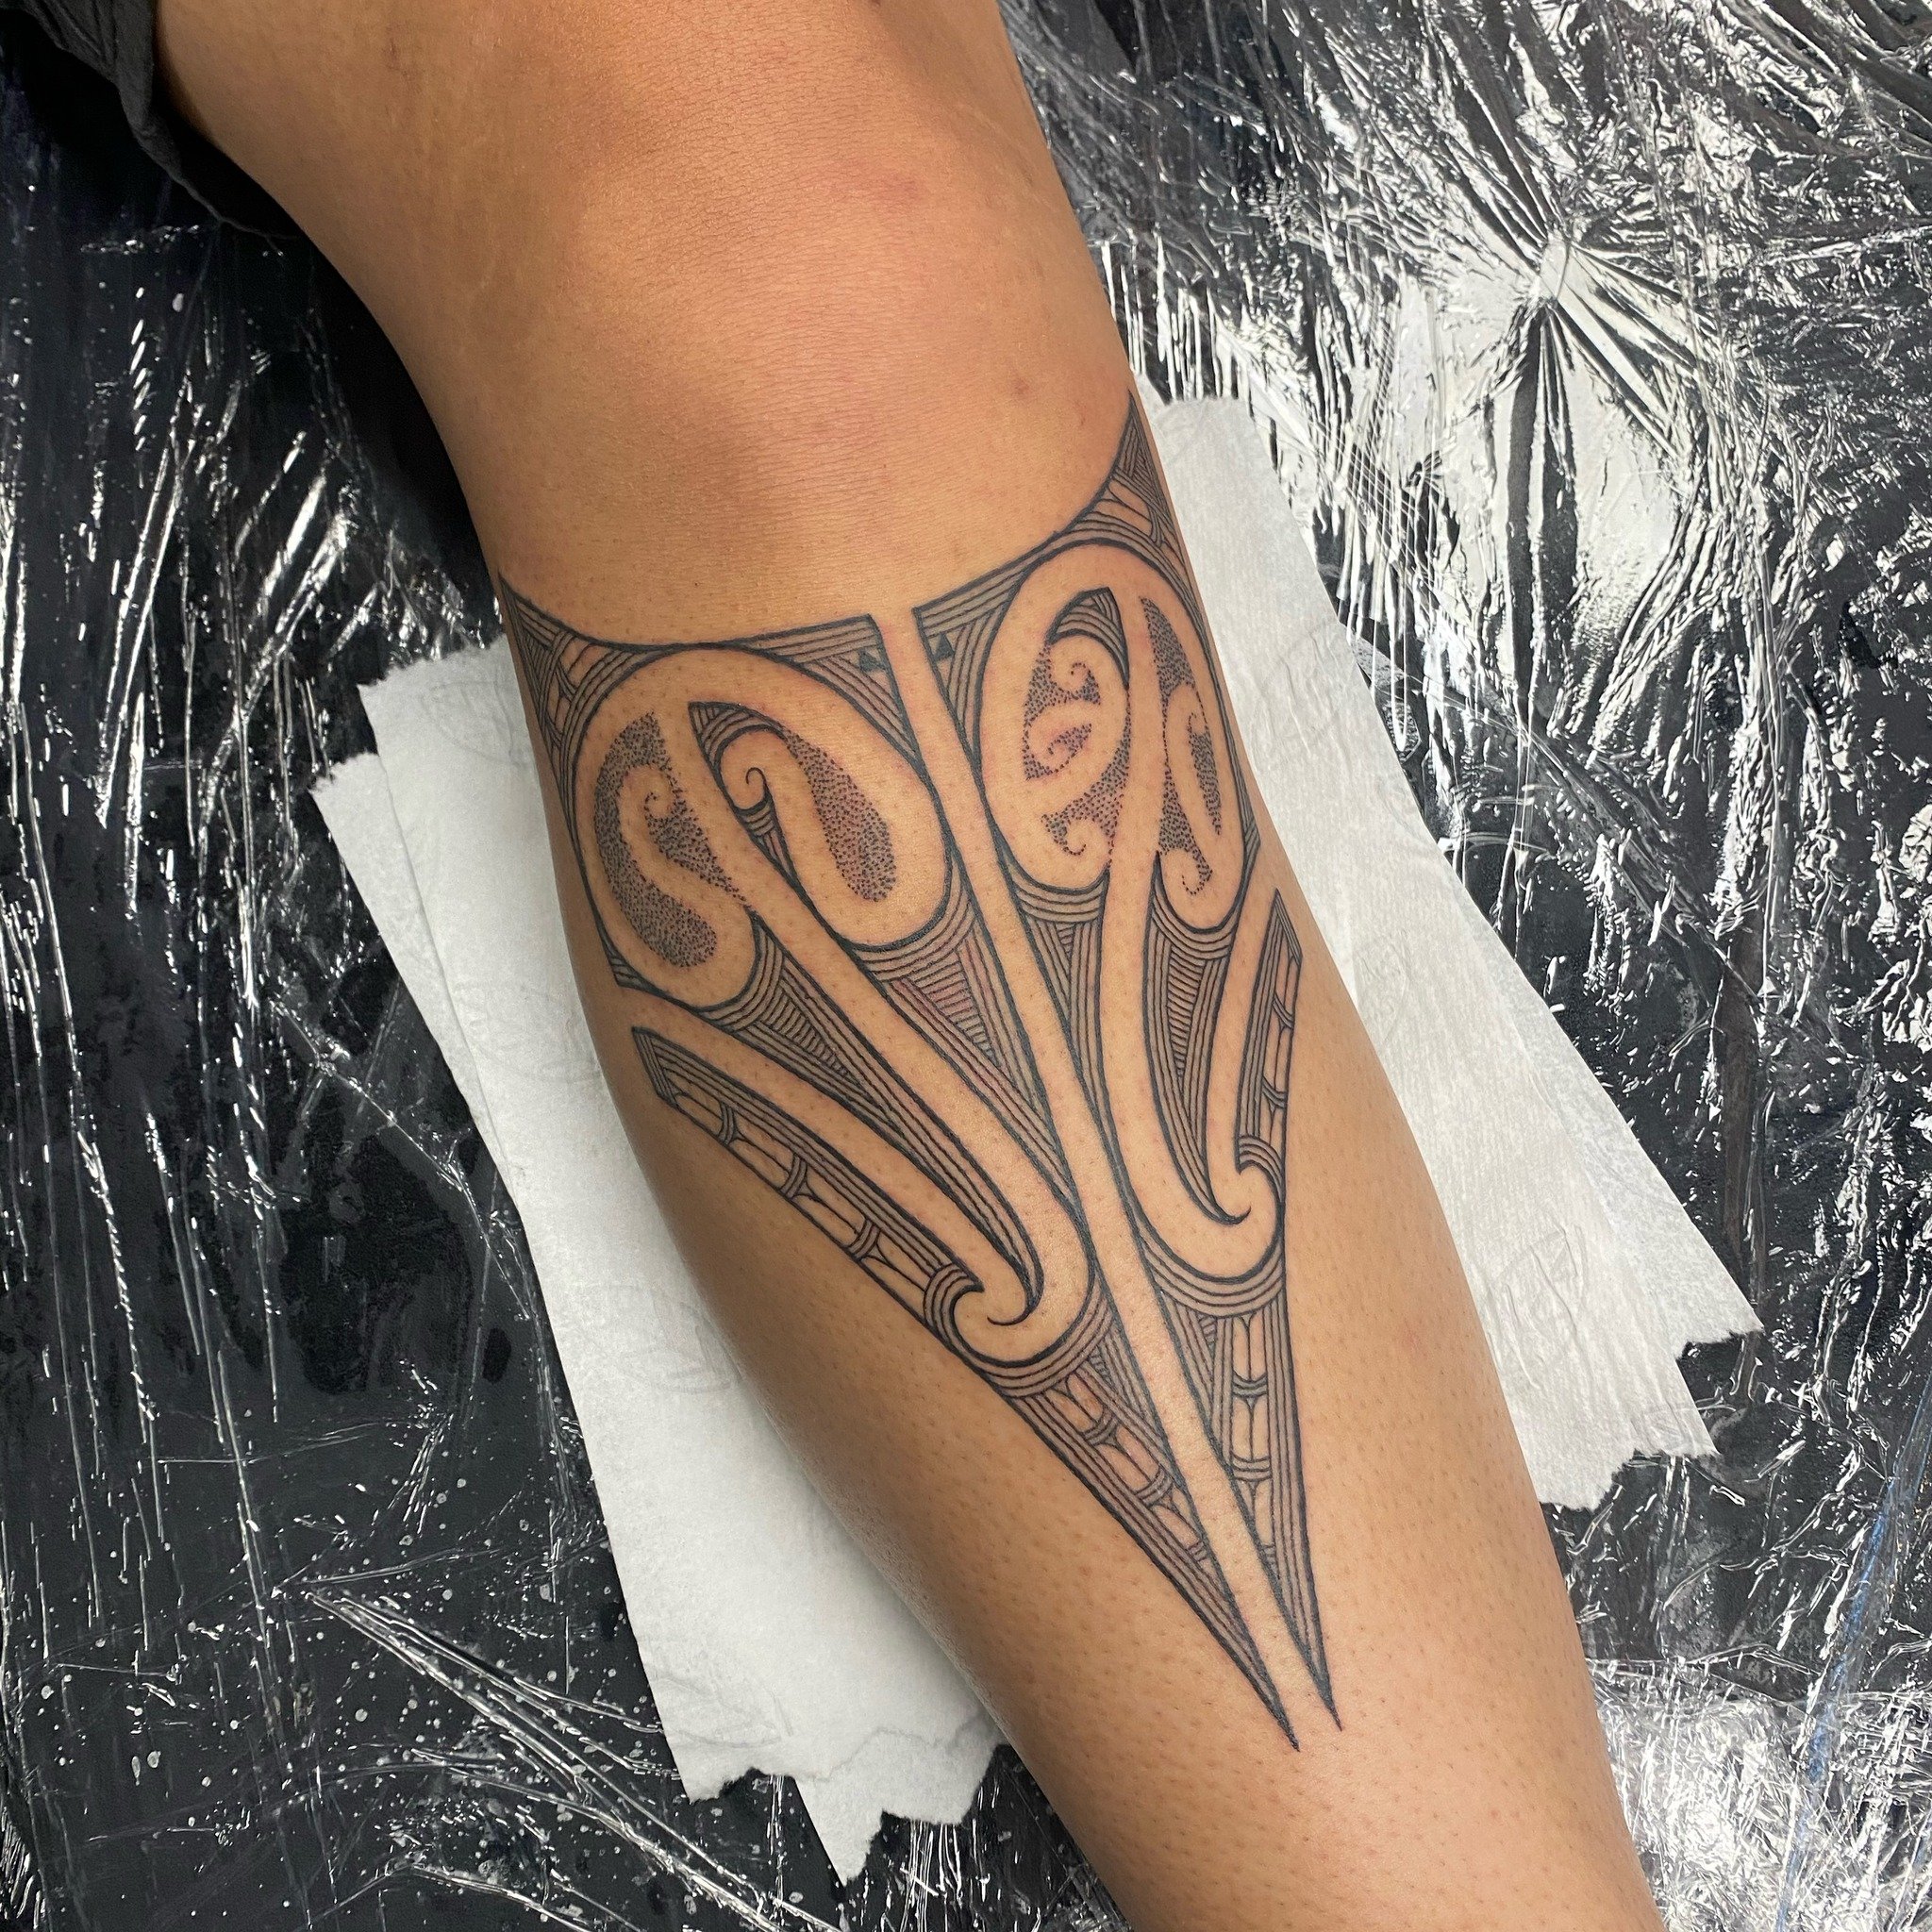 Custom Moko shin piece by @inked_by_heat 

Joseph has availability in May 

Laybuy and Afterpay available